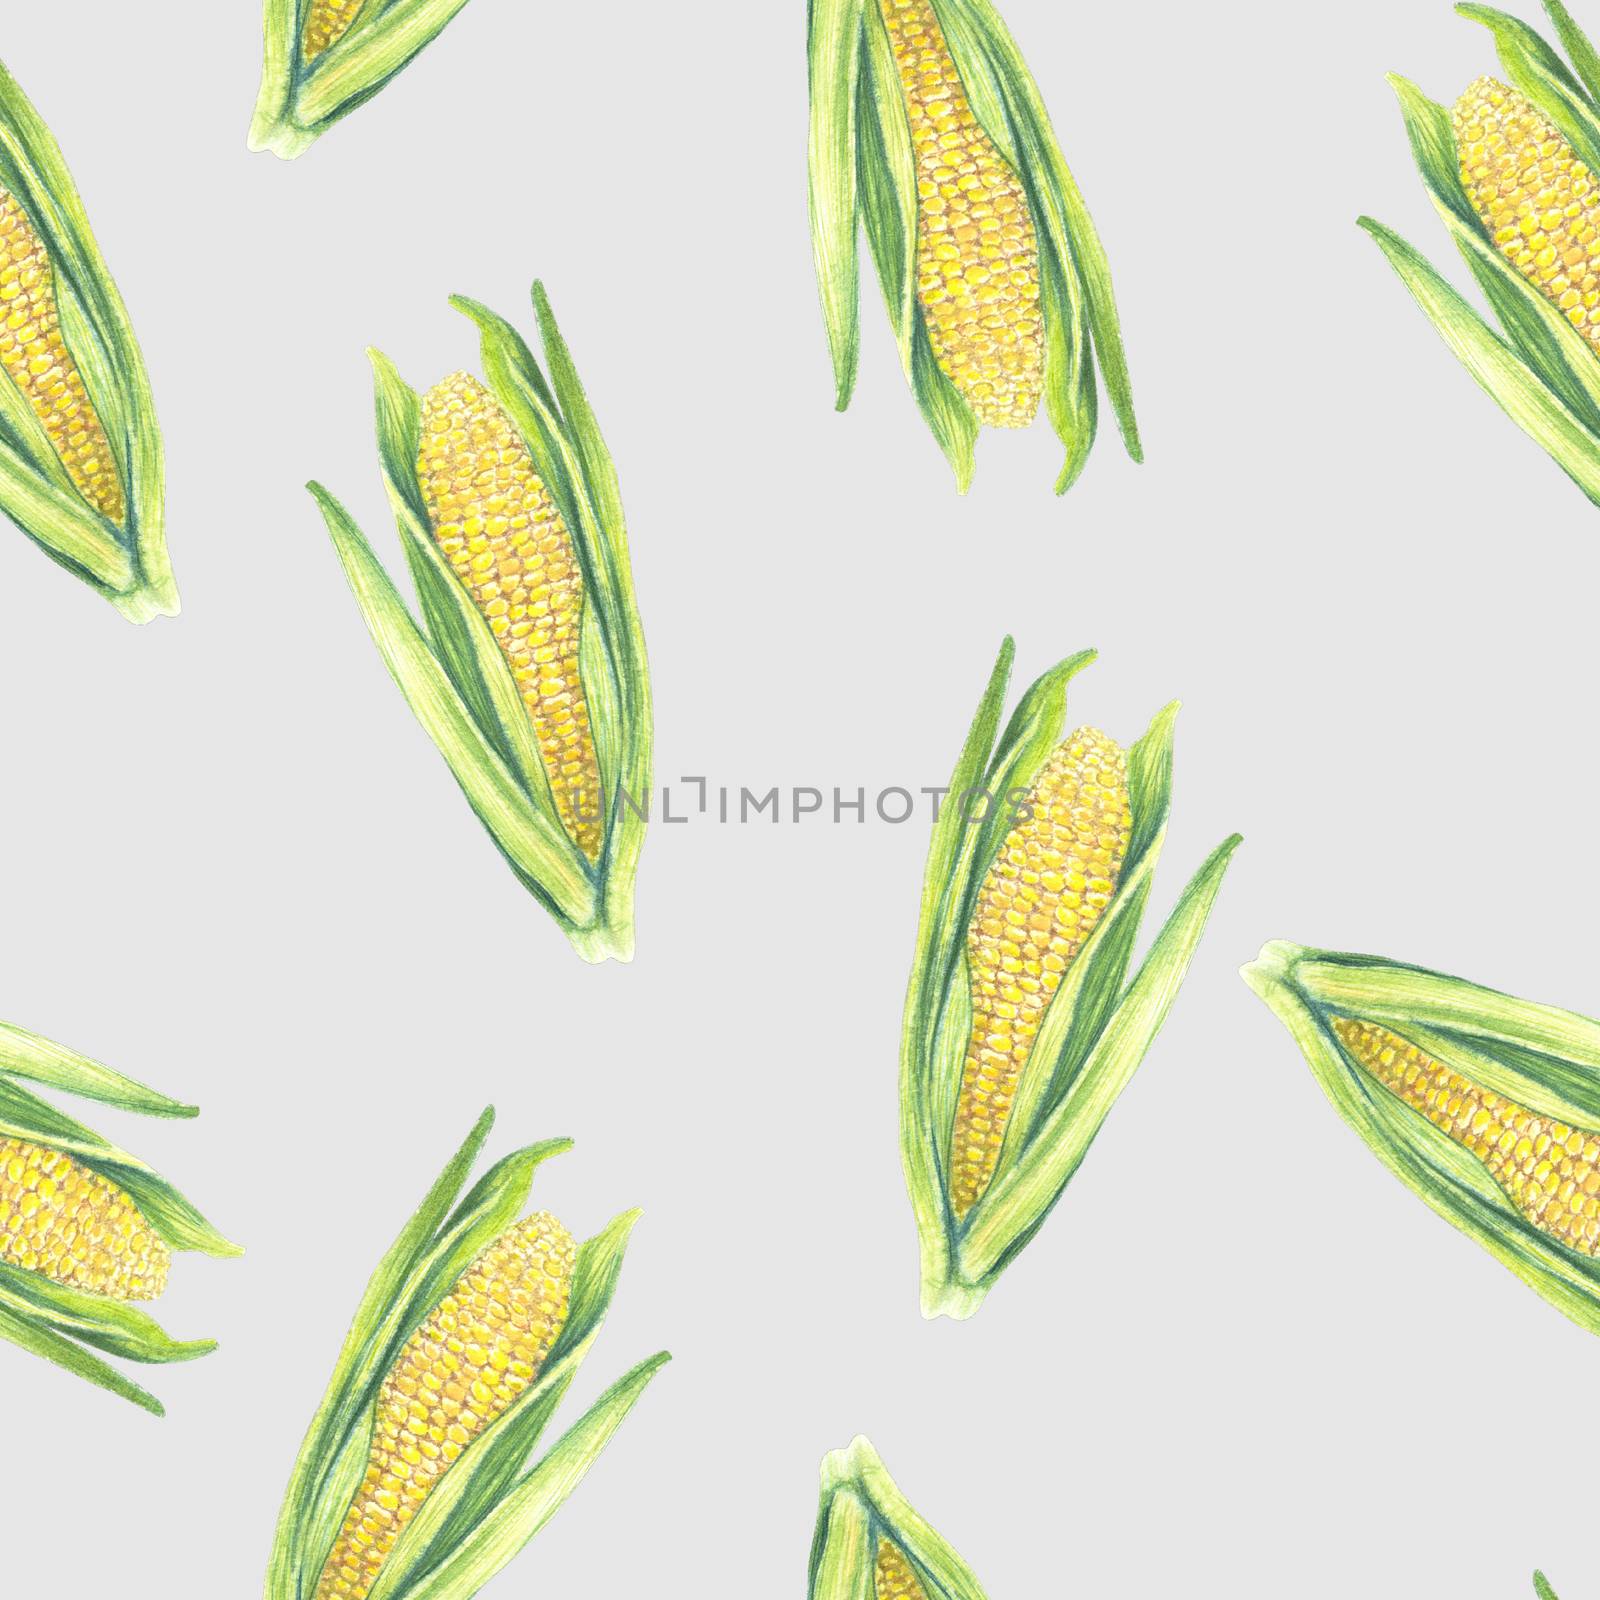 Seamless Pattern of corn cobs with leaves on grey background. Eco vegetables plants. Shop design, healthy lifestyle, packaging, textile. Hand drawn watercolor illustration. Botanical realistic art. by sshisshka